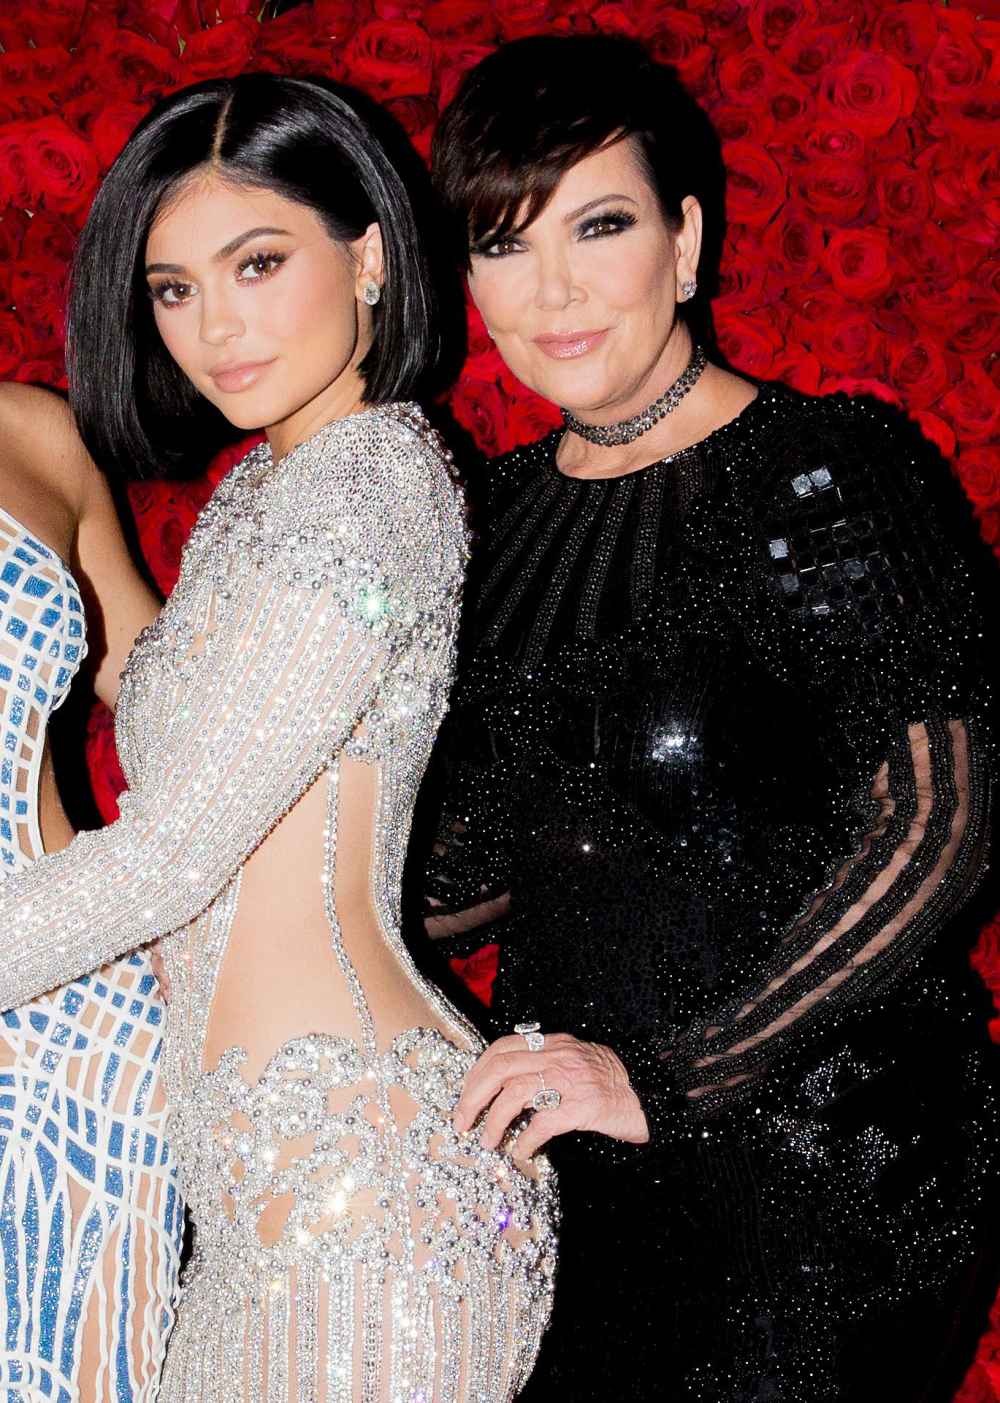 Kris and Kylie Jenner Coty Business Deal